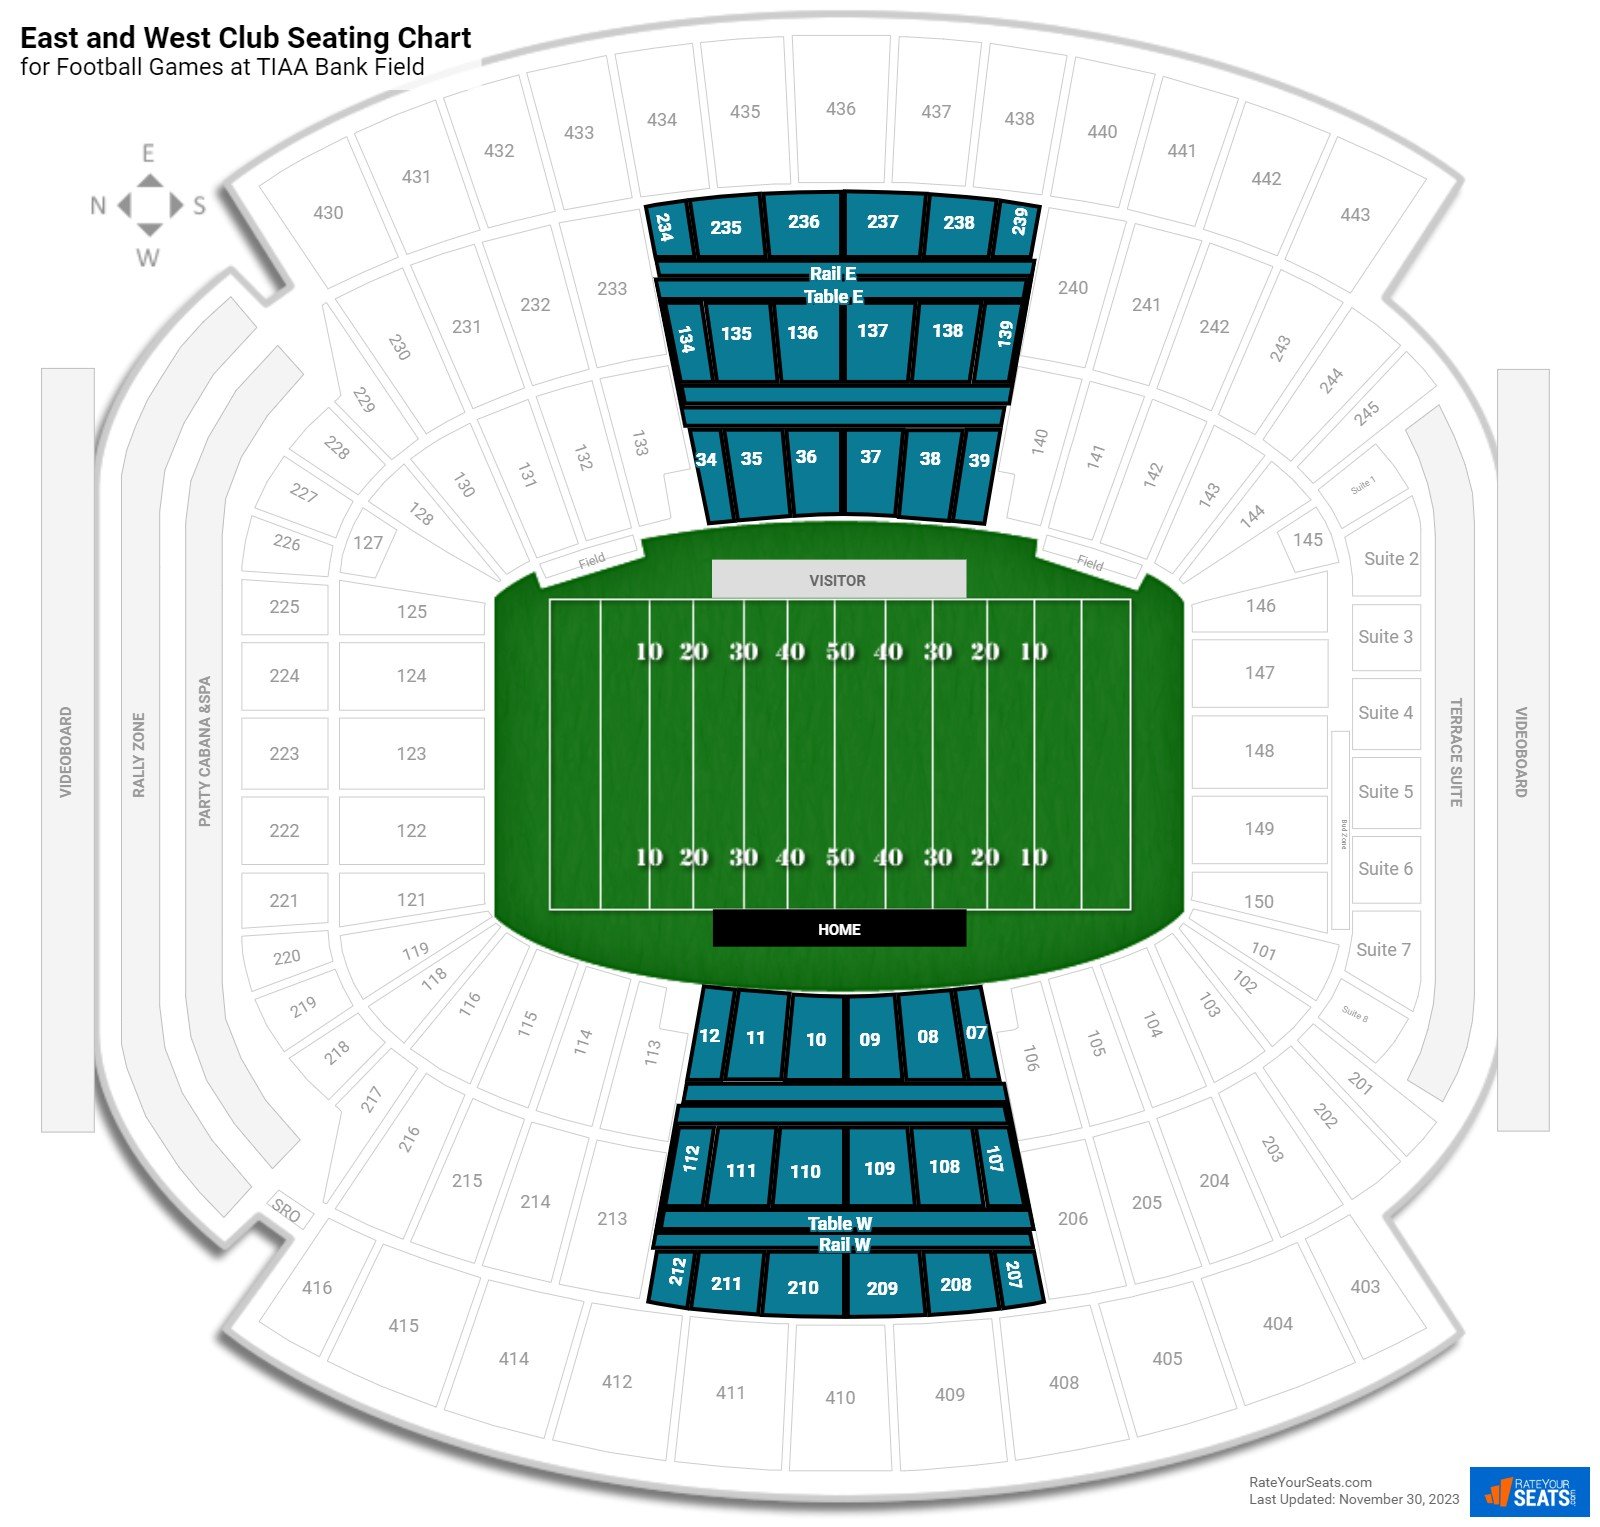 Football East and West Club Seating Chart at TIAA Bank Field